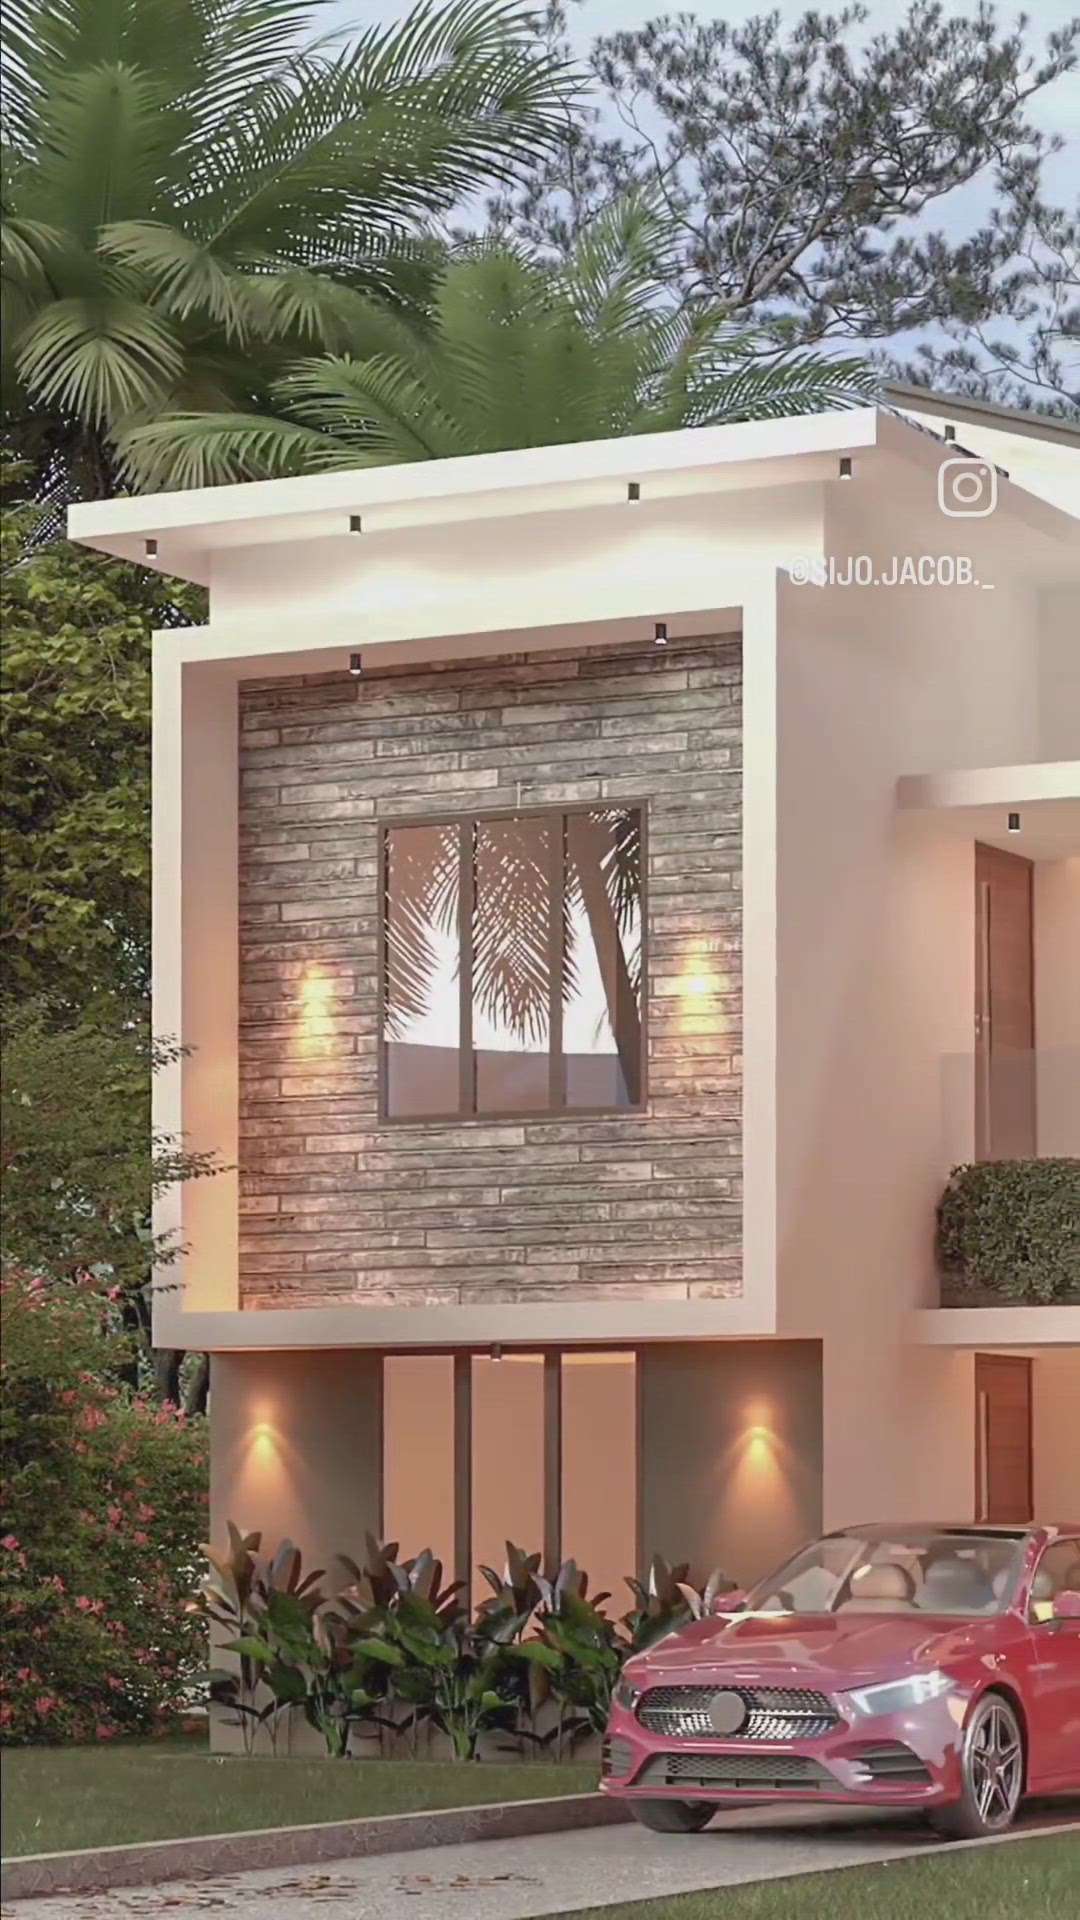 3 bedroom home. Total area 1250 sqft. #3BHKHouse #ContemporaryHouse #modernhome